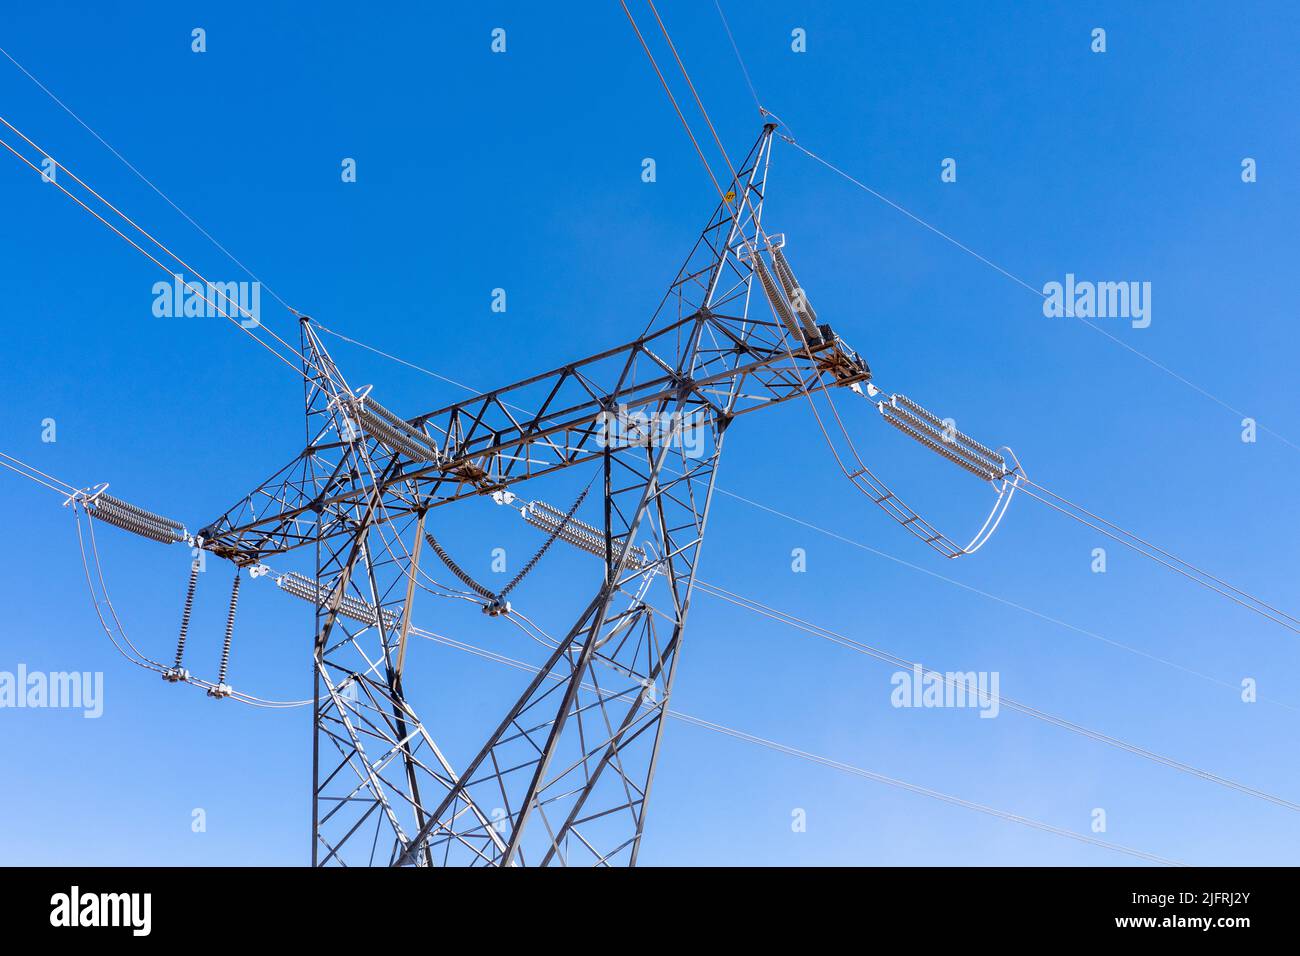 A steel girder tower for high-voltage electricity transmission lines. Stock Photo